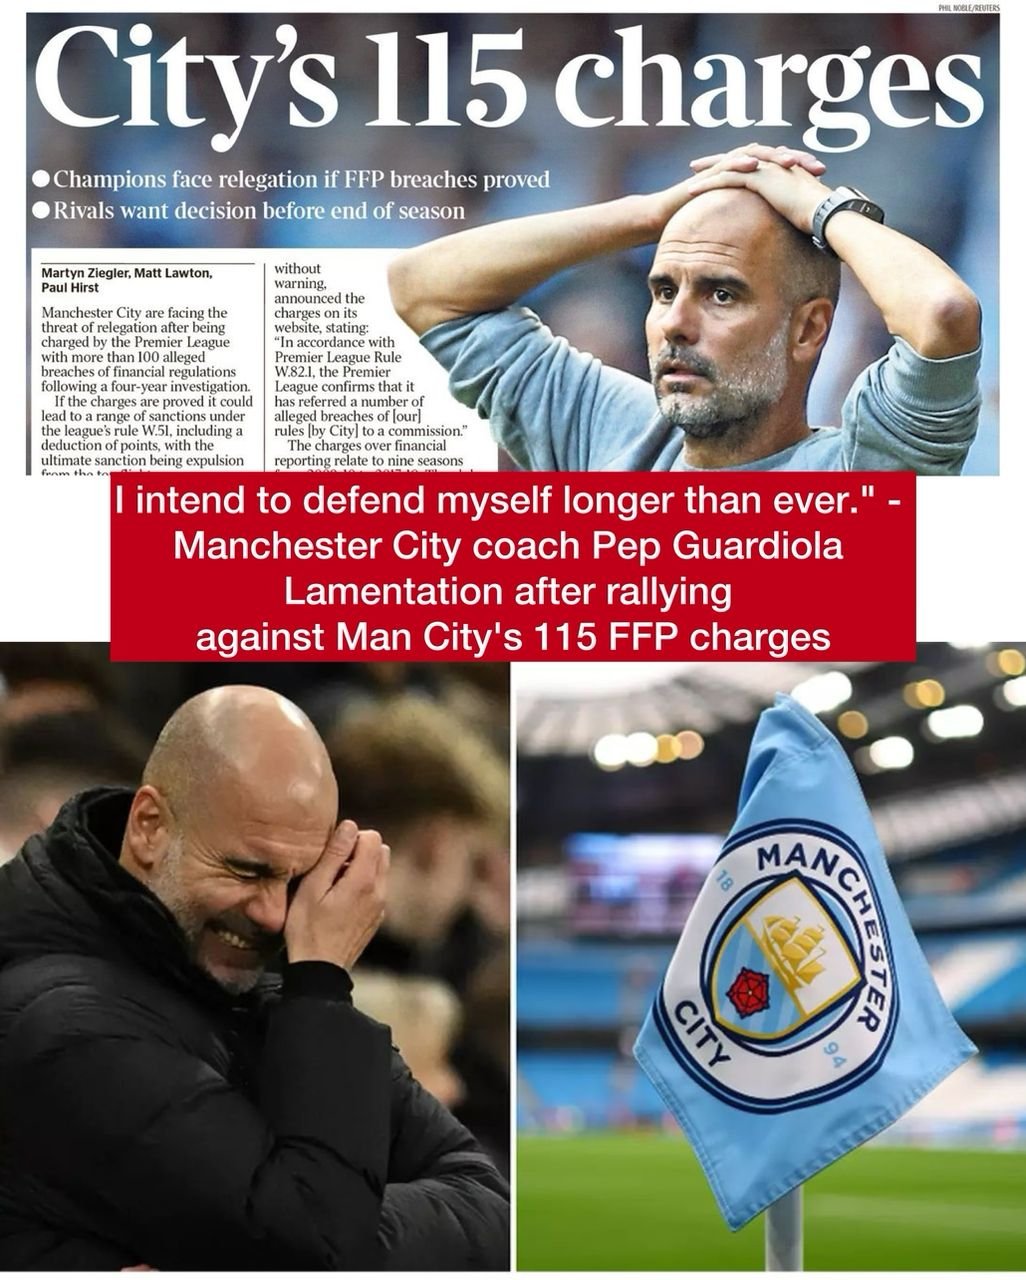 I intend to defend myself longer than ever." - Manchester City coach Pep Guardiola Lamentation after rallying against Man City's 115 FFP charges